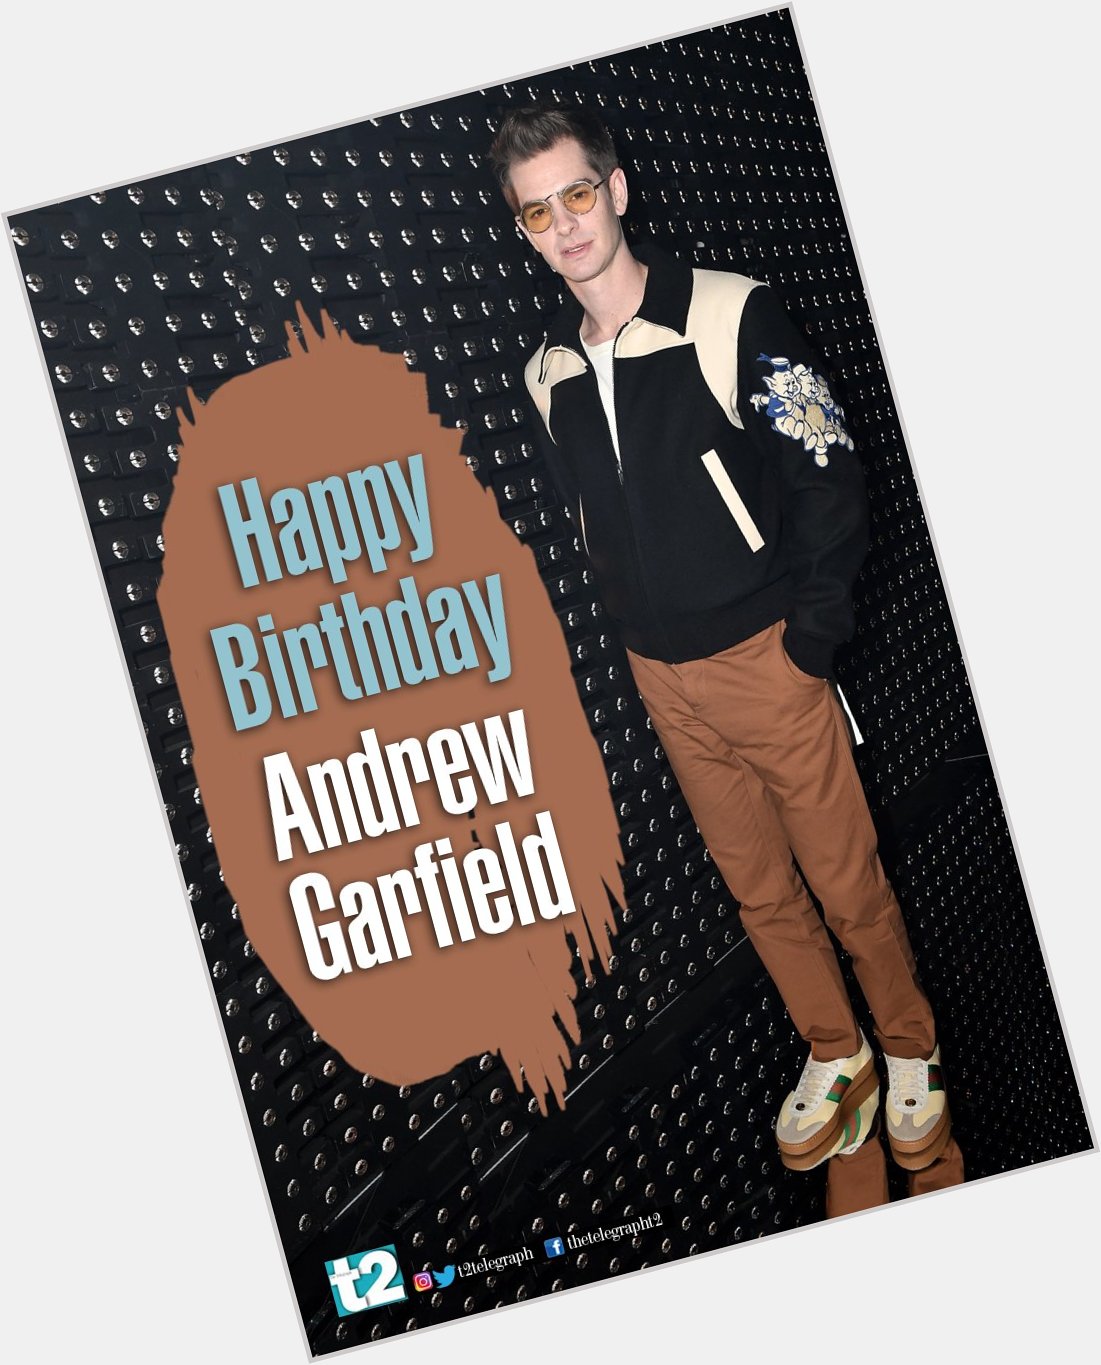 He may no longer play Spiderman, but he continues to swing into our hearts. Happy birthday, Andrew Garfield! 